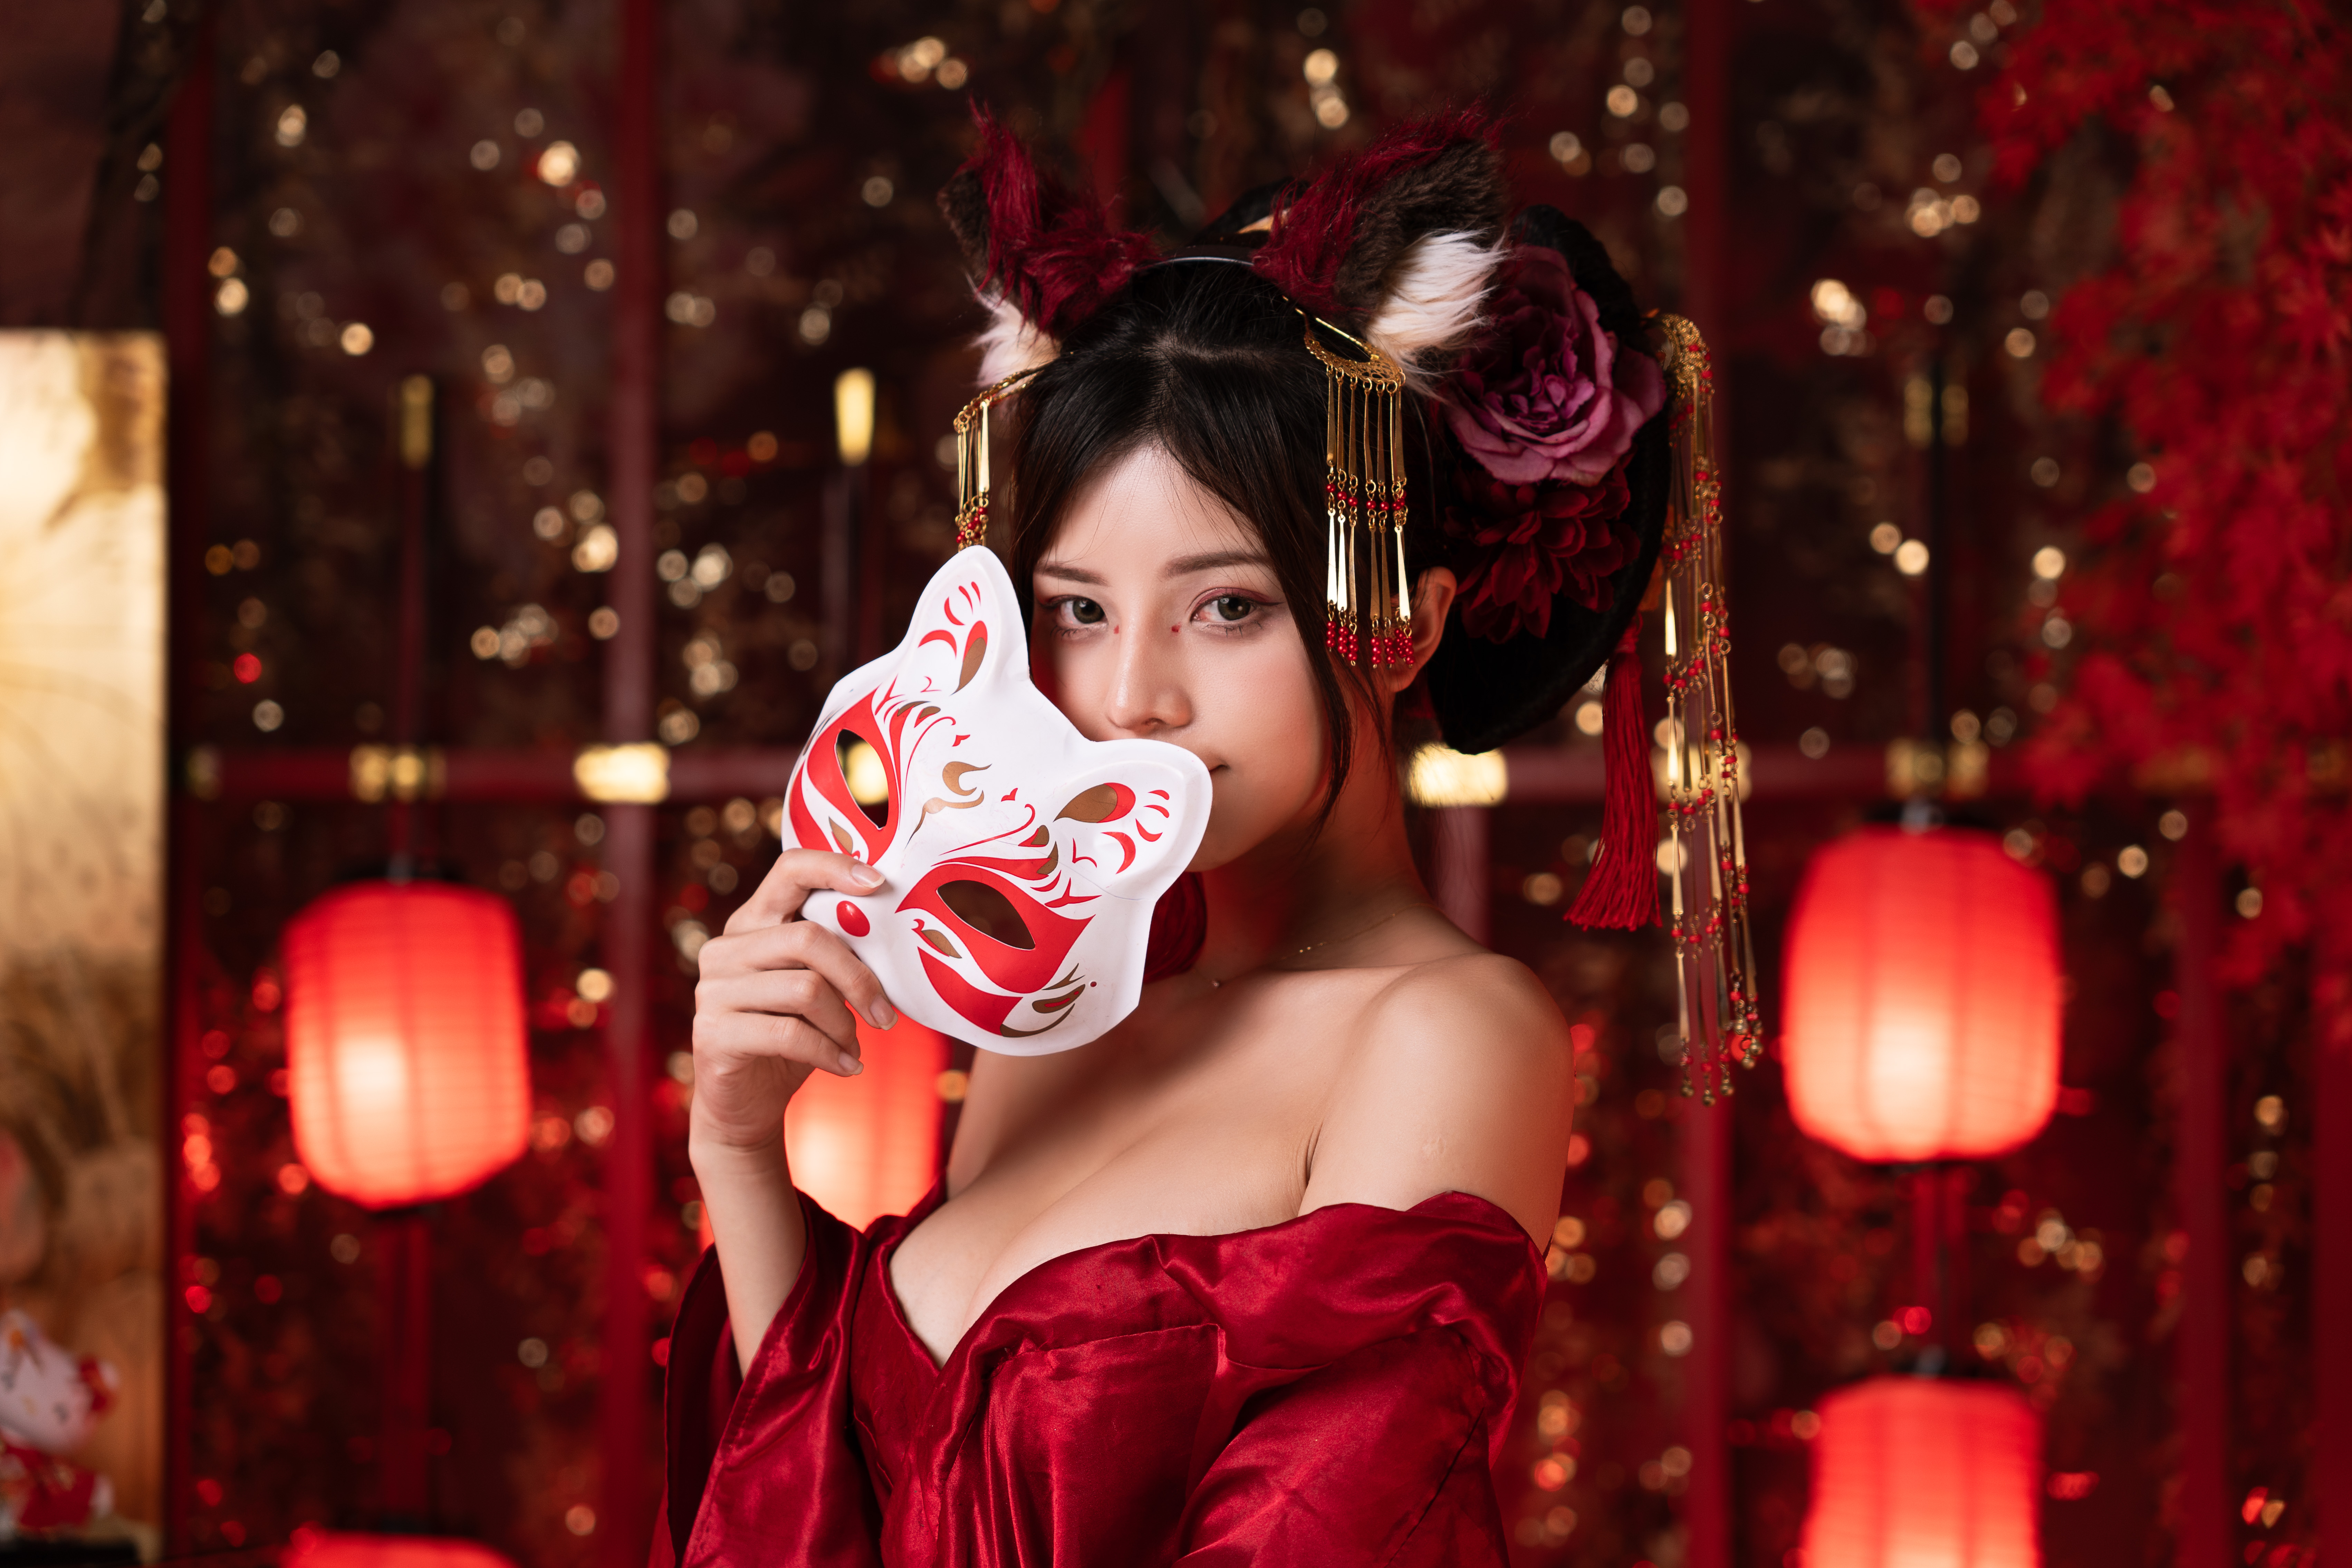 Chaos Kao Women Asian Mask Red Clothing Hair Accessories Model Brunette Bare Shoulders Women Indoors 6811x4541